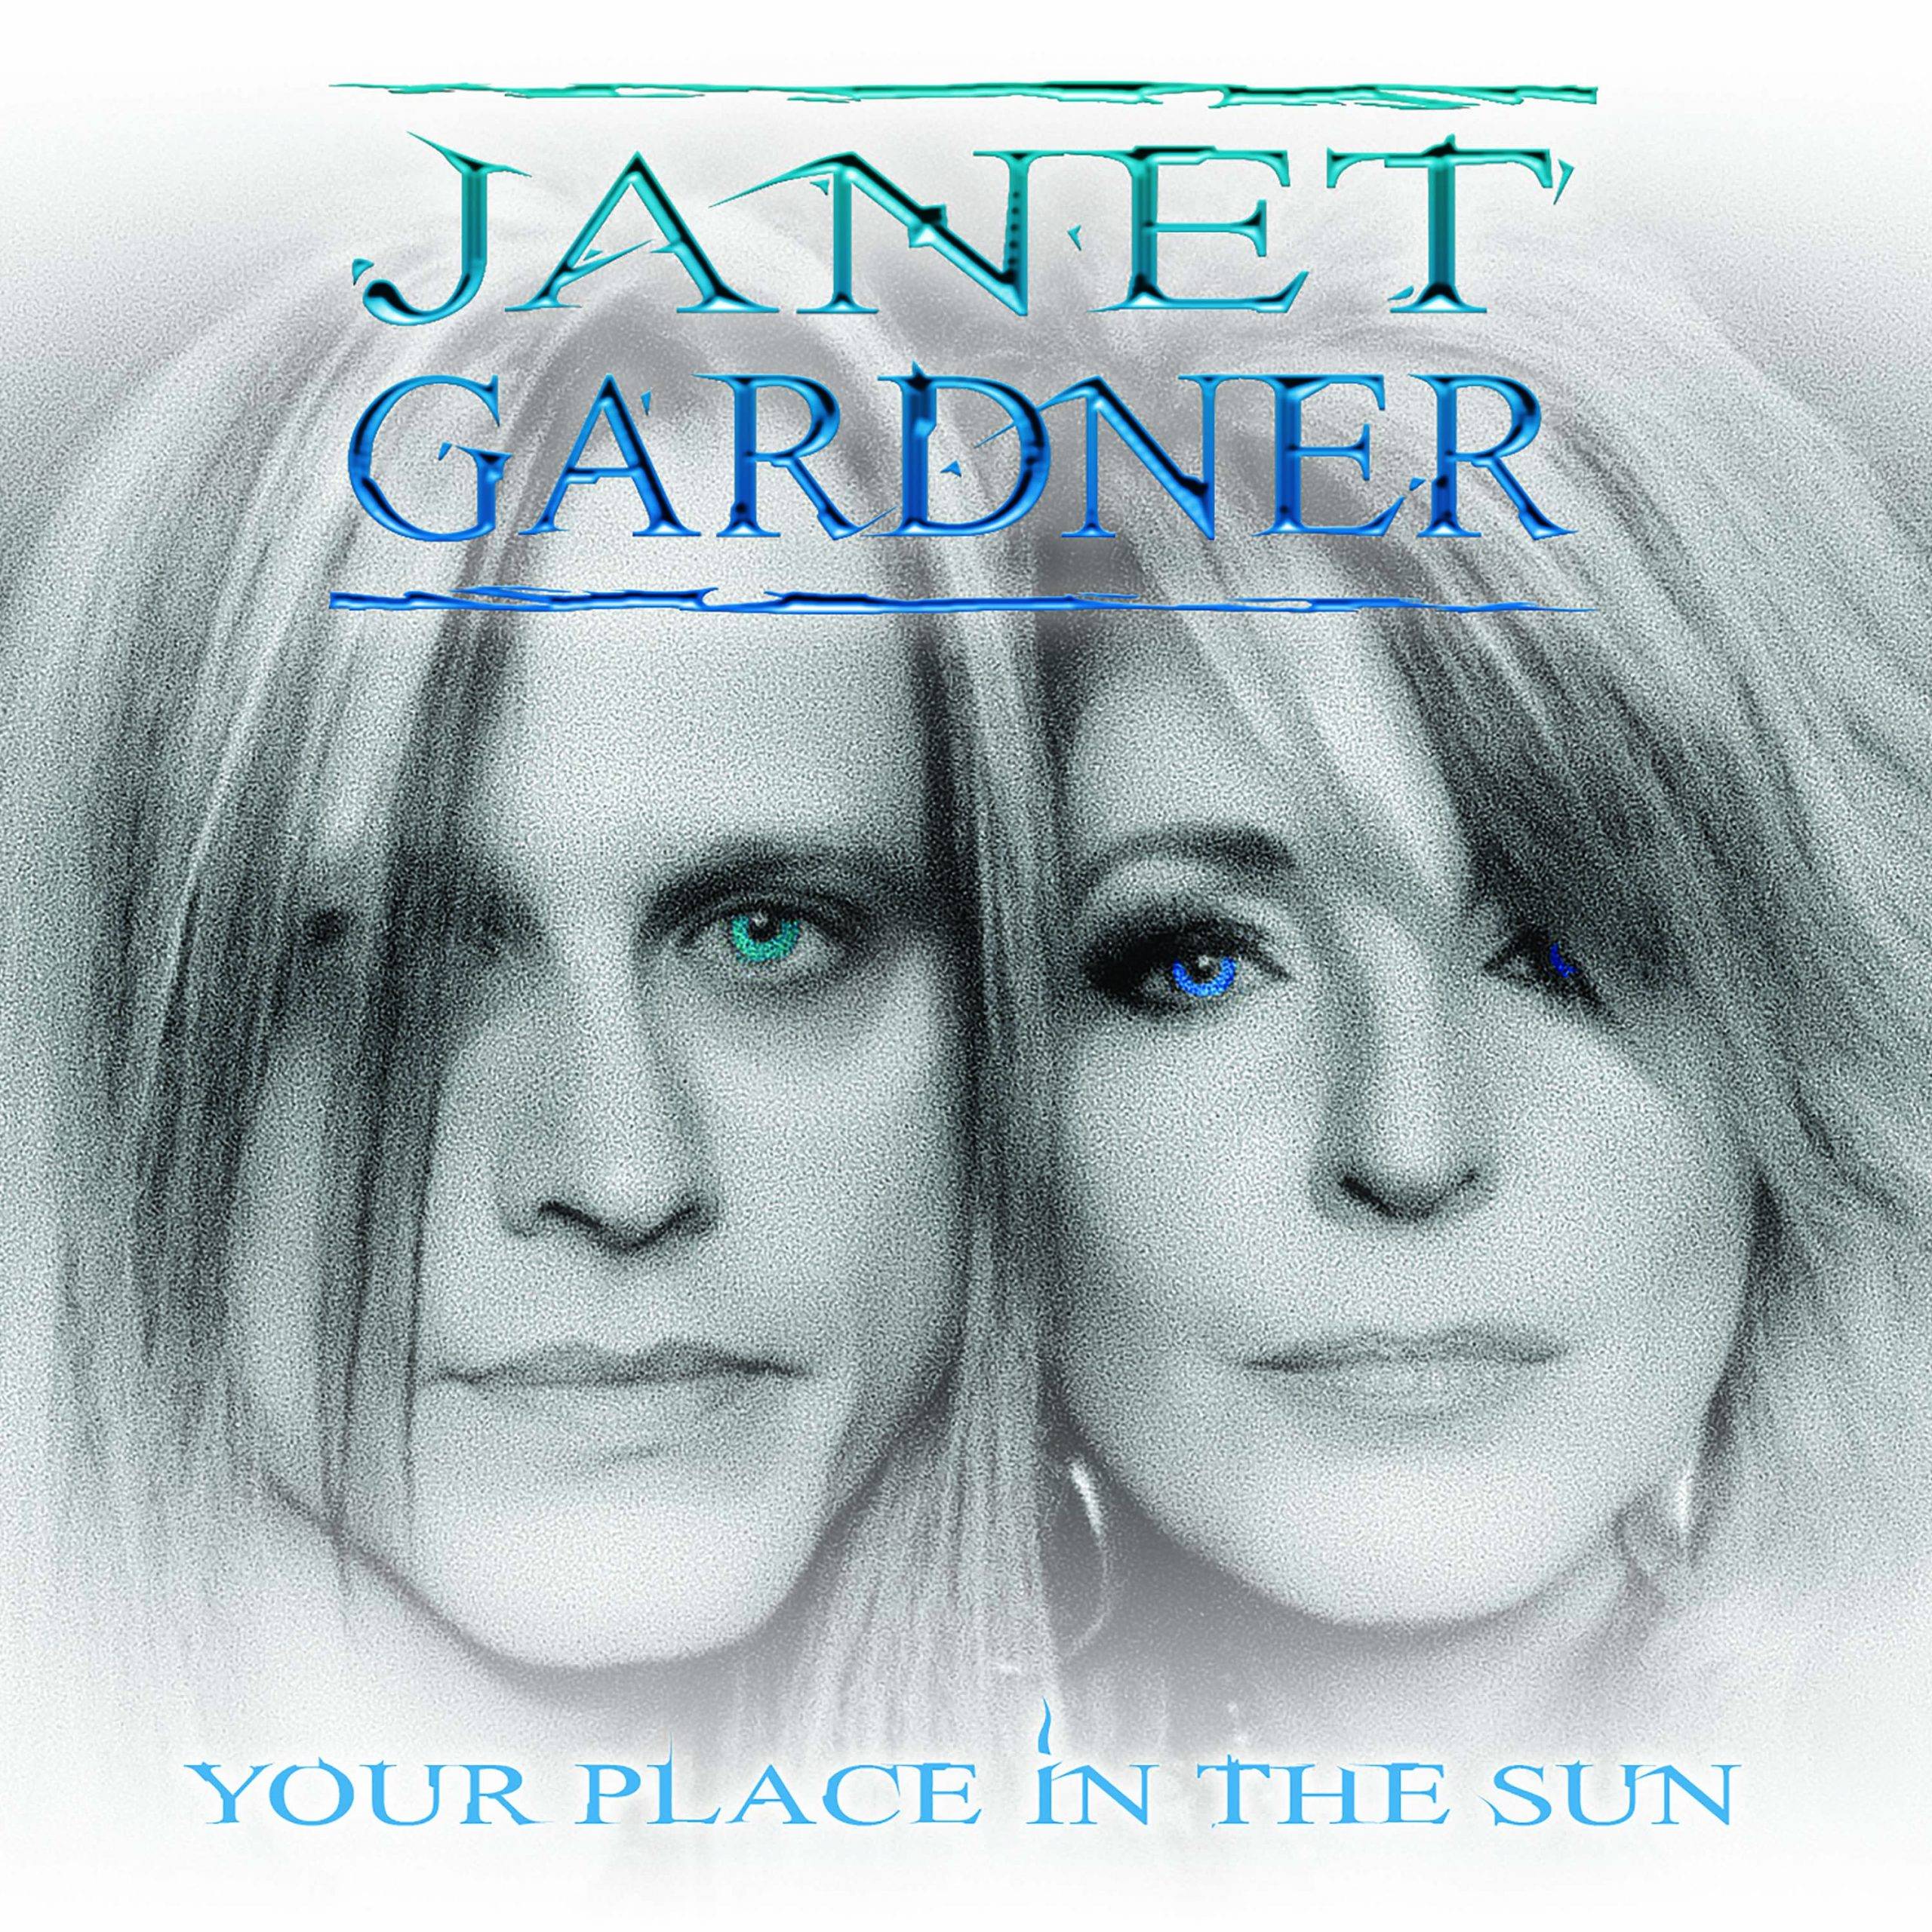 Janet Gardner : "Your Place in The Sun" CD & Digital 21th June 2019 Pavement Music .